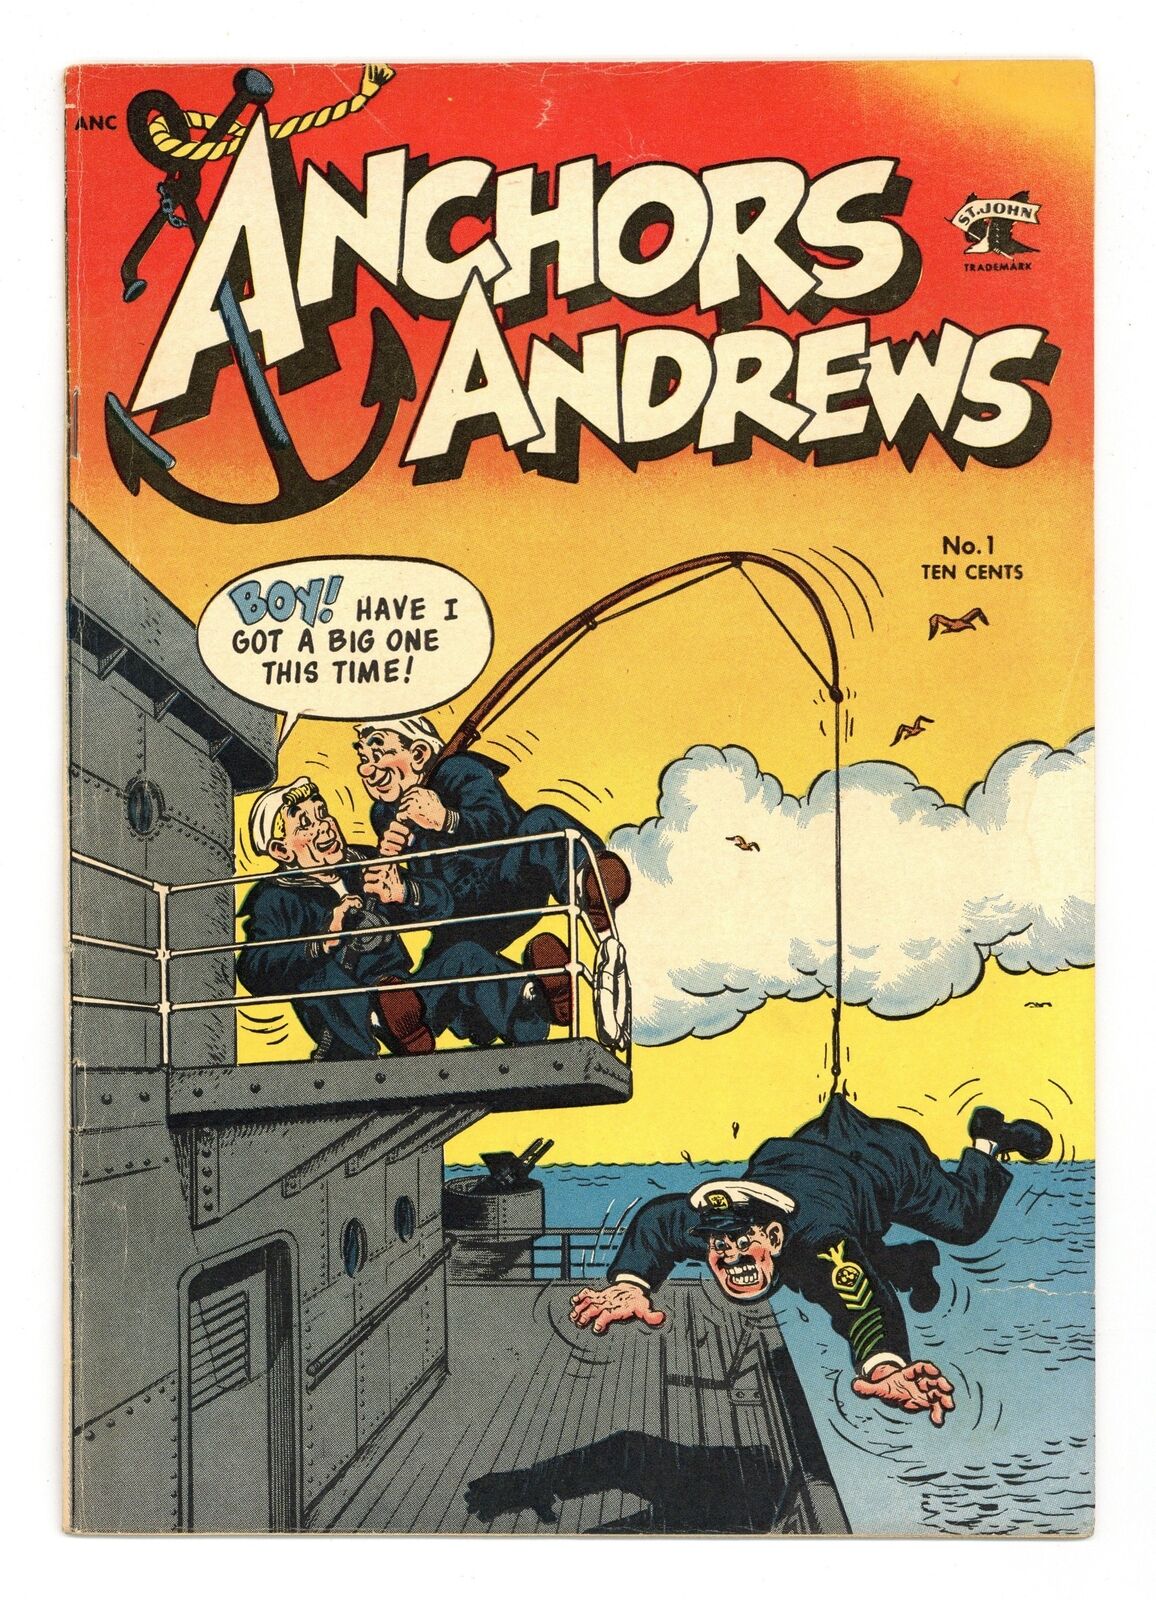 Anchors Andrews #1 VG+ 4.5 1953